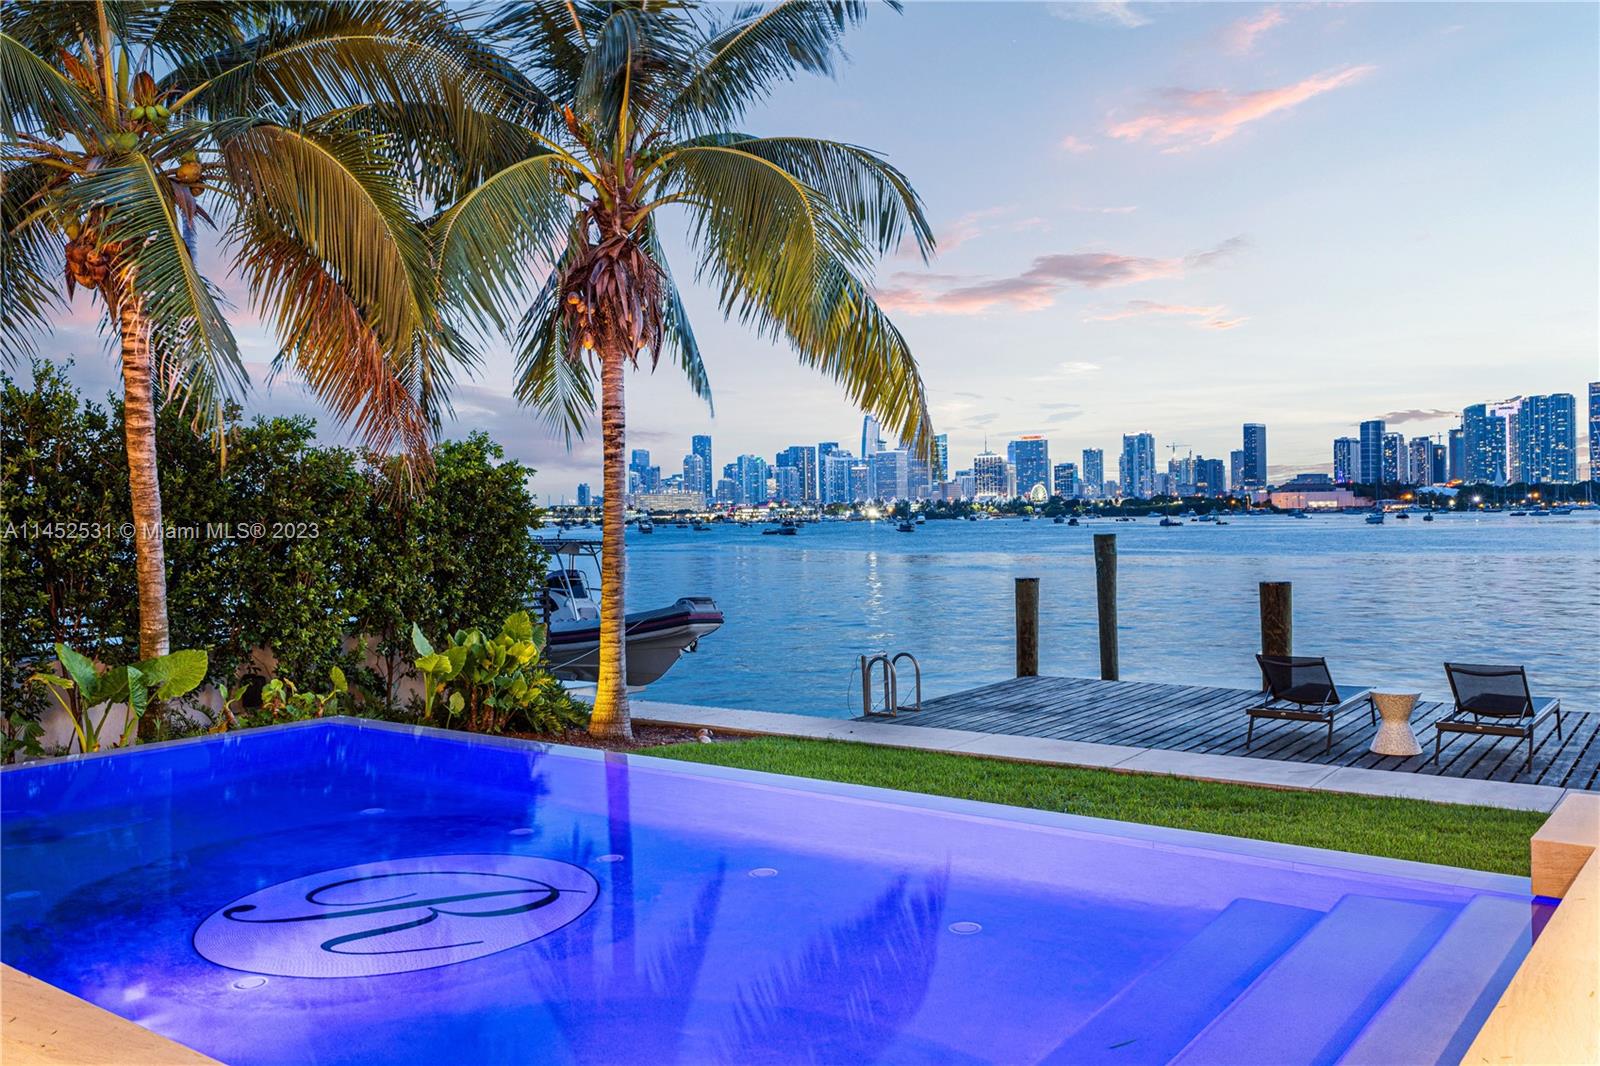 Enjoy unparalleled sunsets and envious Miami skyline views from this striking modern waterfront estate by Choeff Levy Fischman! Enter into a grand, double-height foyer leading directly into the bright open floor plan living area featuring sliding telescopic doors for seamless indoor/outdoor living. Expansive primary suite with an adjoining office overlooking the bay. White Oak floors throughout, rich millwork, and stunning book matched marble in the kitchen and primary bathroom. This entertainer’s paradise features a  covered summer kitchen, infinity pool, a dock with lift, and s rooftop terrace with endless 360 degree views.